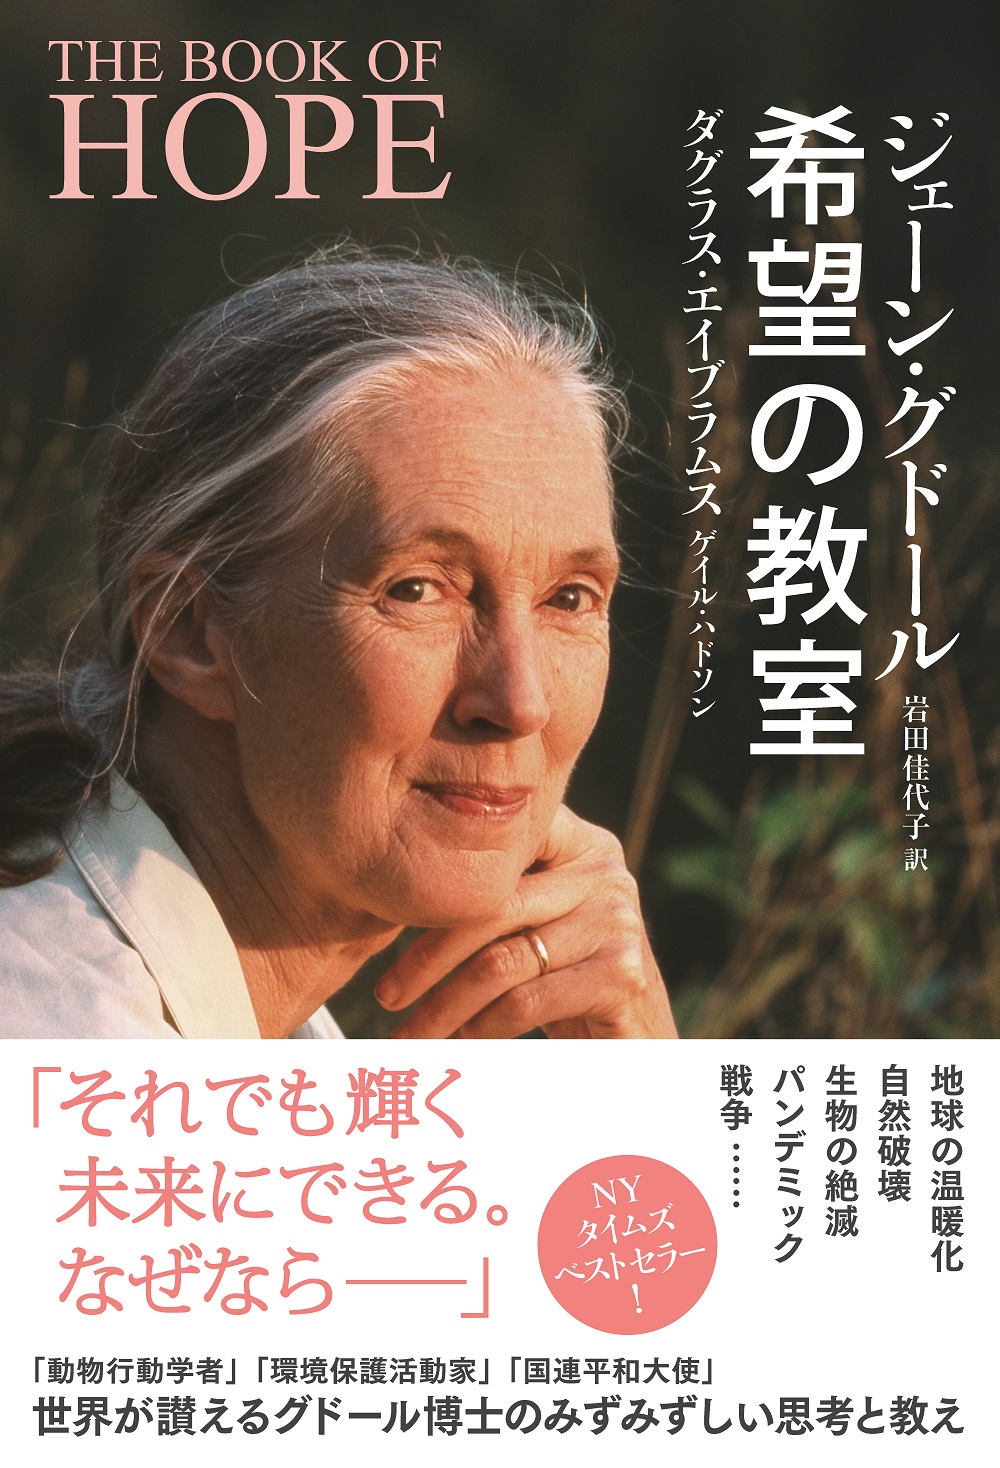 Jane Goodall & Douglas Abrams - The Book of Hope: A Survival Guide for an Endangered Planet｜ジェーン・グドール＆ダグラス・エイブラムス『希望の教室』